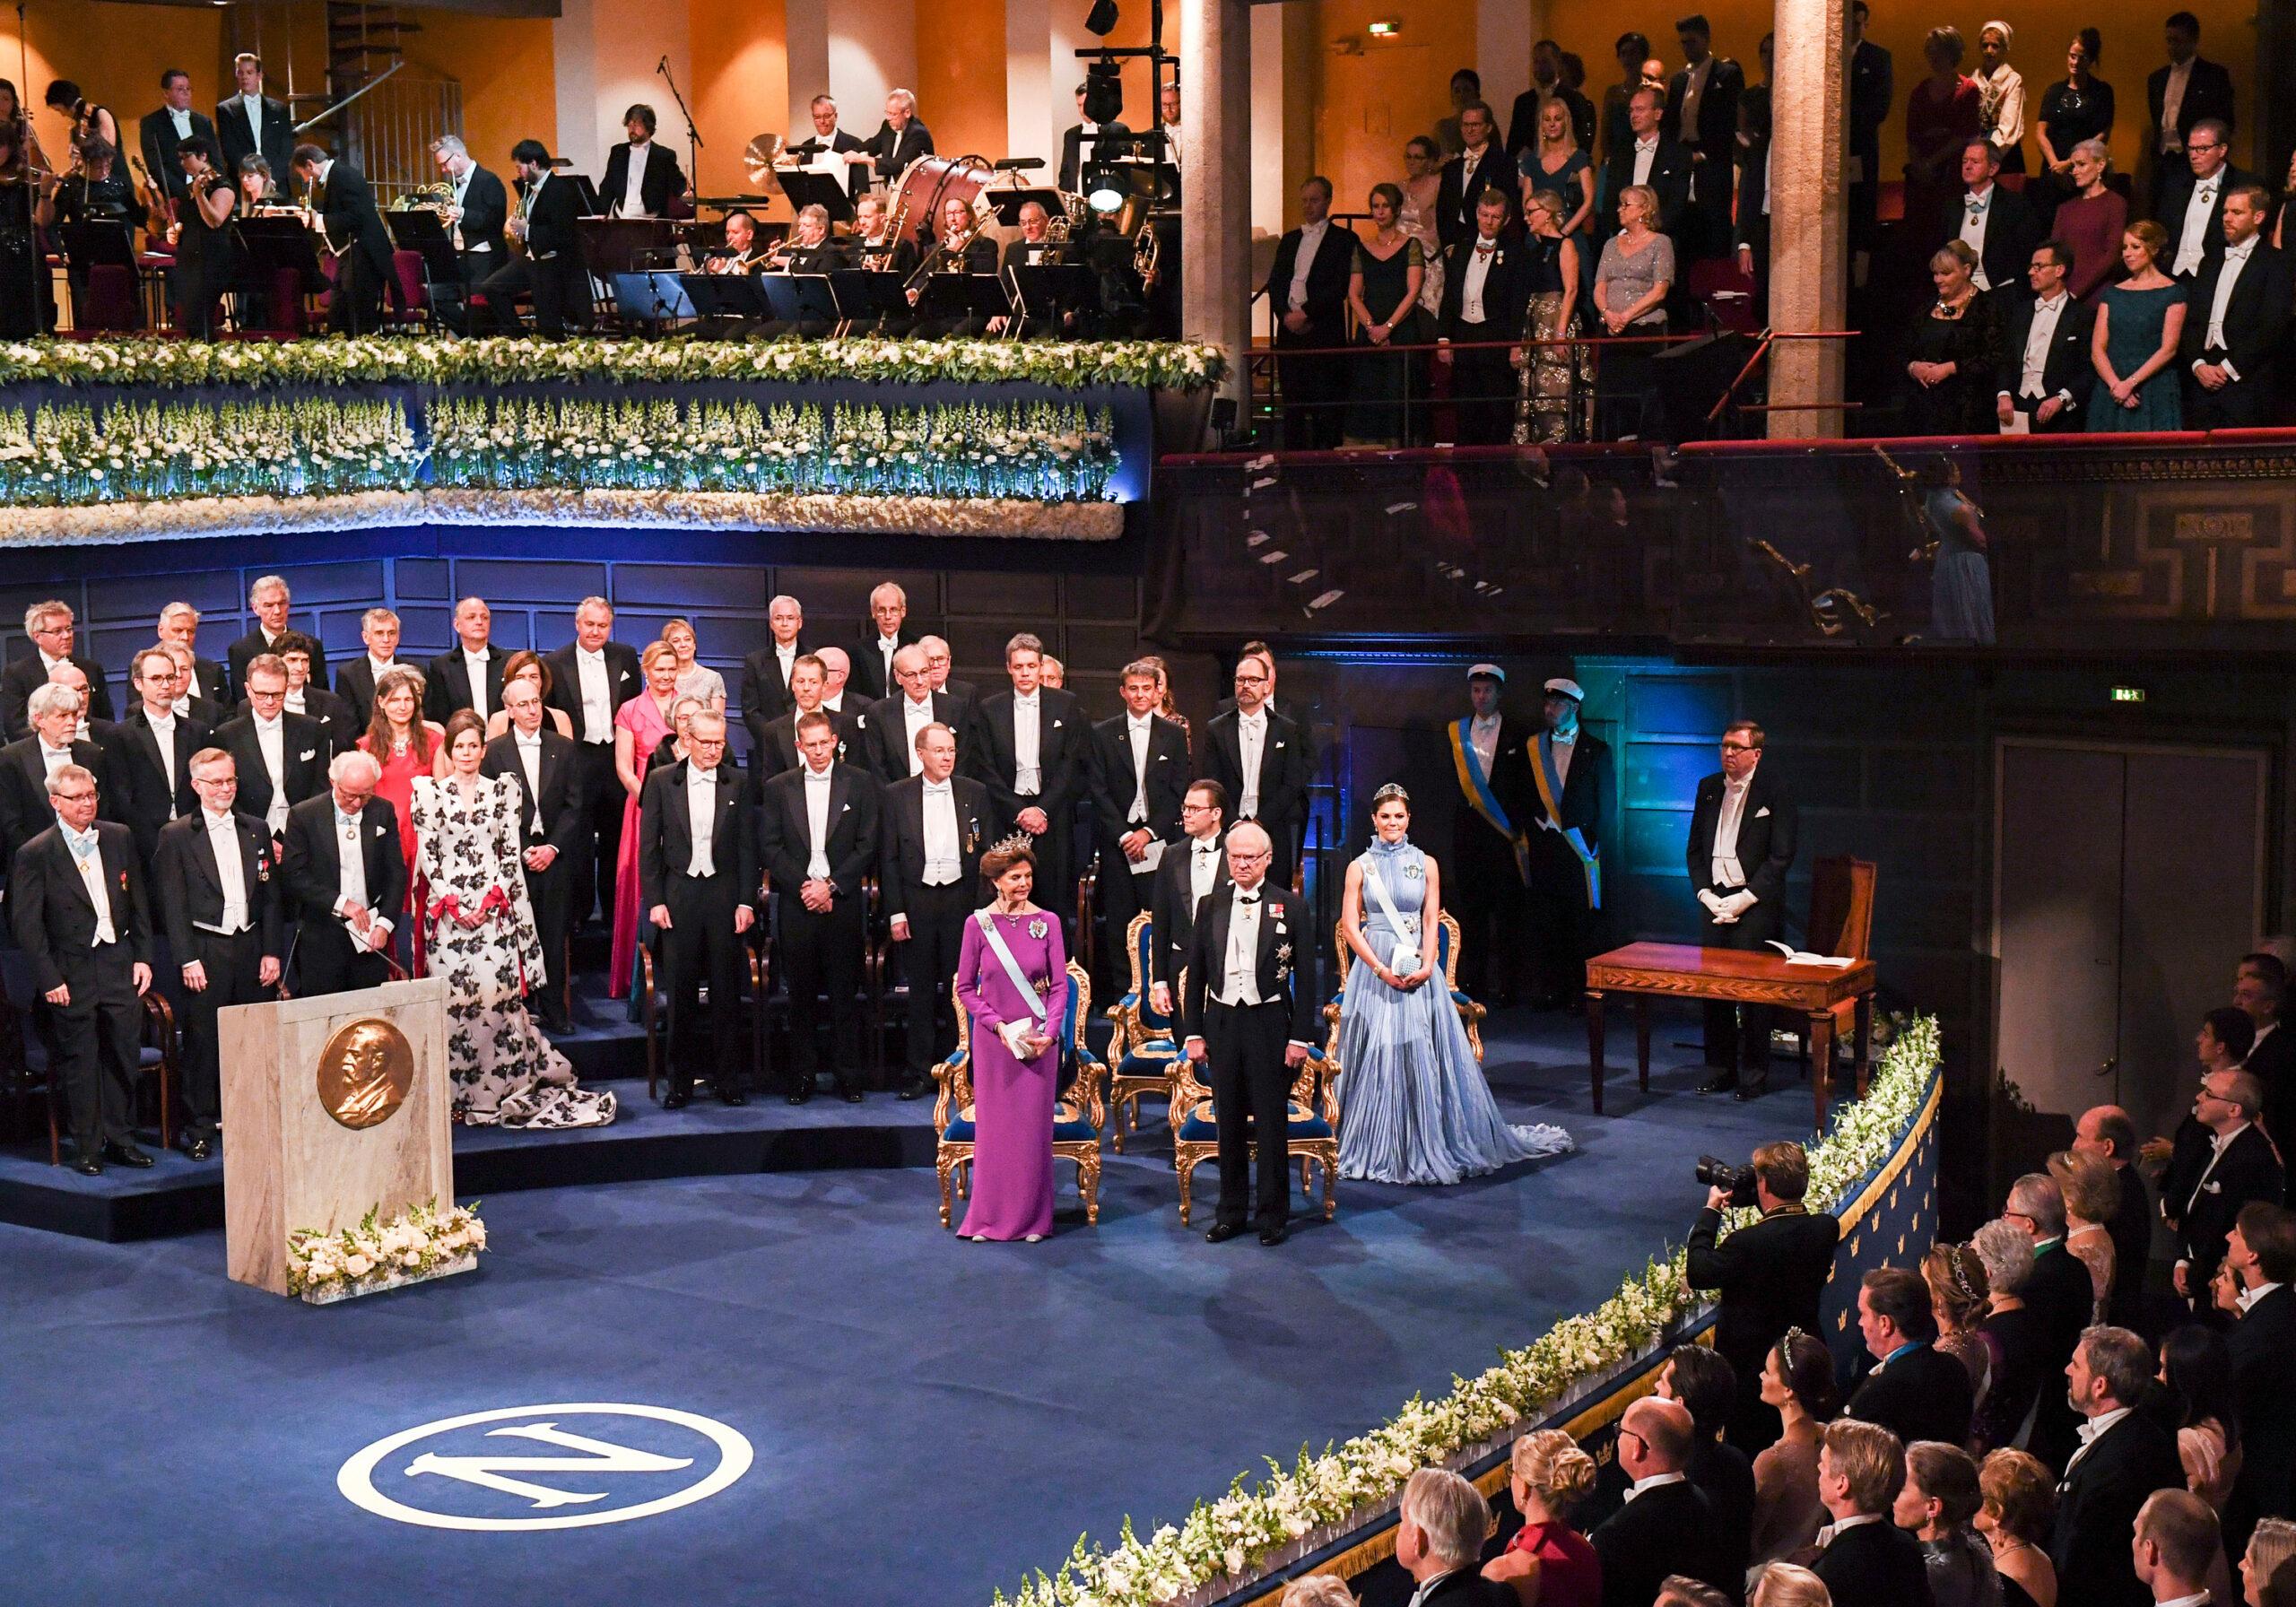 The Nobel Prize award ceremoni in Stockholm Concert Hall, with Queen Silvia, Prince Daniel, King Carl XVI Gustaf and Crown Princess Victoria seen to the right.